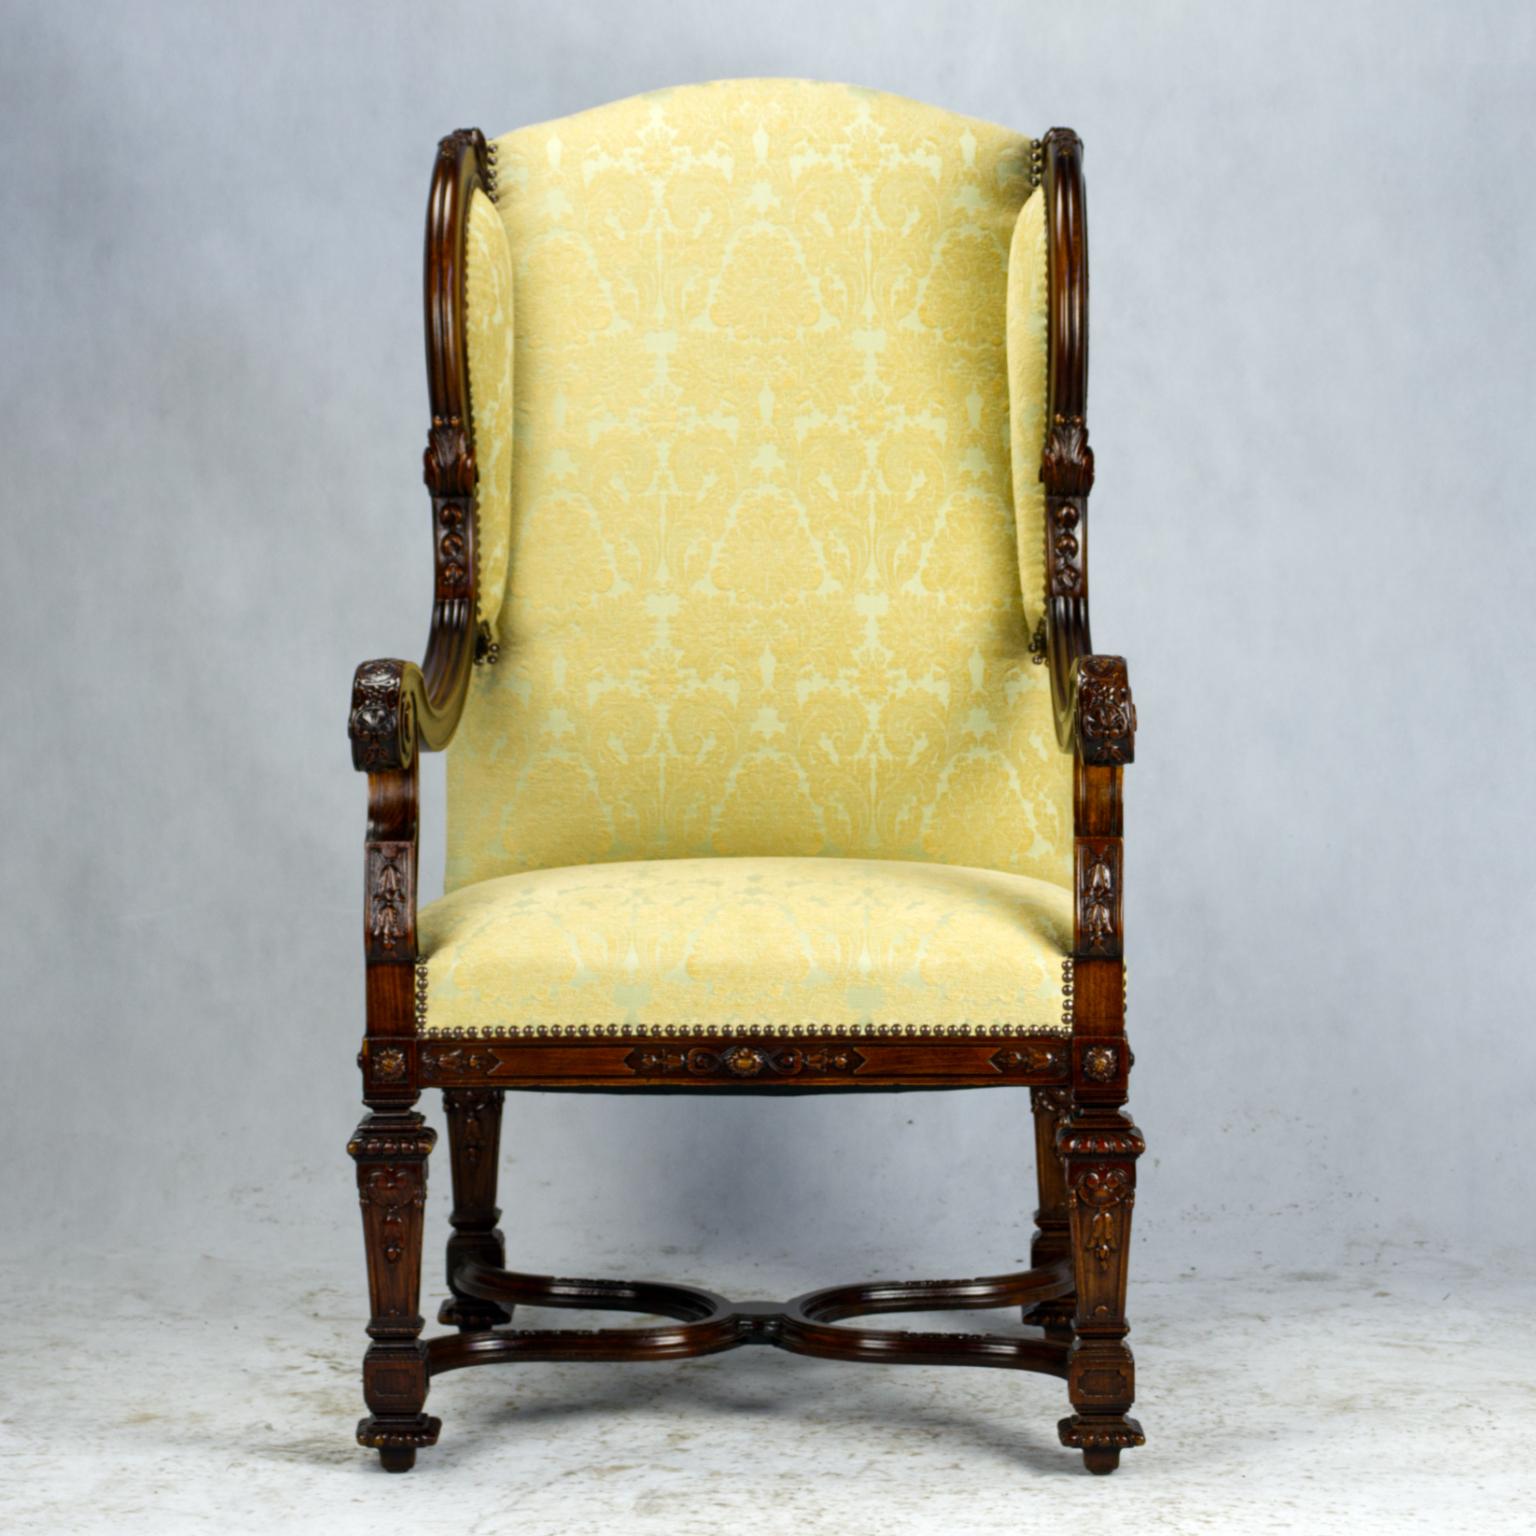 French Louis XIV walnut wingback armchair is a study in stately elegance, with extraordinary comfort. Gracefully contoured wingbacks with double-scrolled frameworks cradle one in luxury, with a generous seat below defined by the contoured and finely